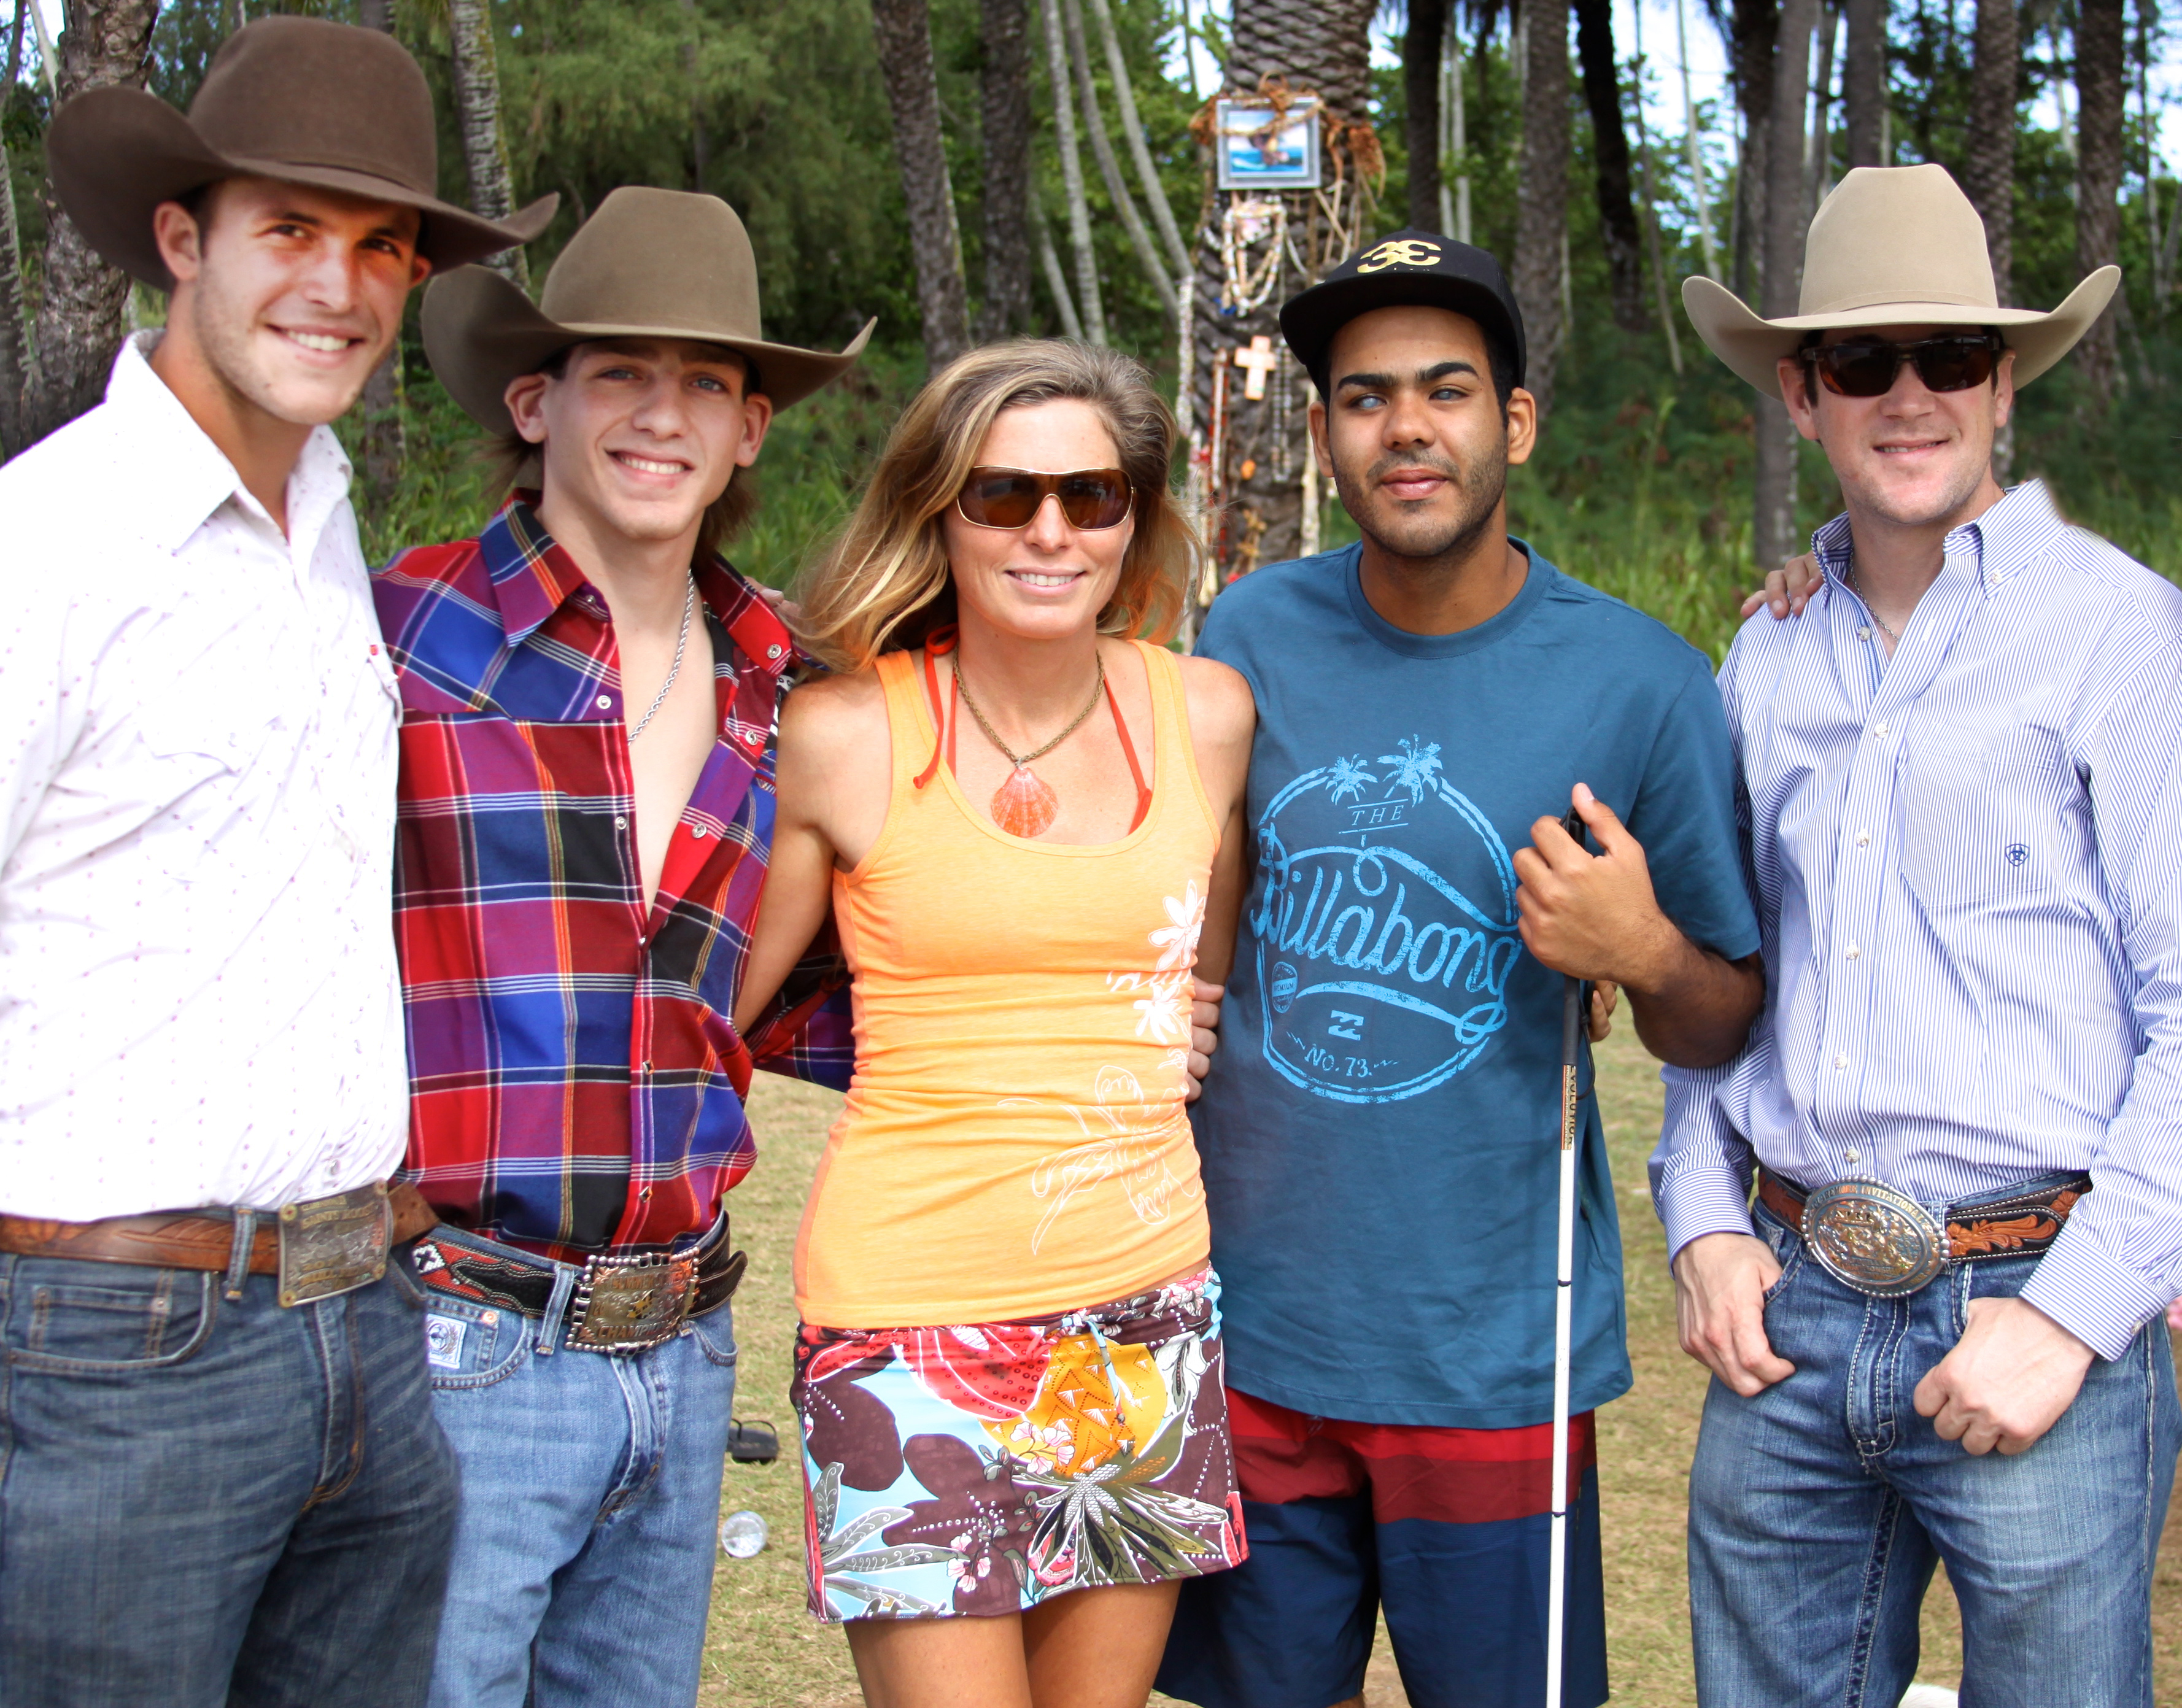 Actress Producer Faith Fay, Pro Surfer Derek Rabelo, and Pro bull riders Thad Newell, Zane Cook, and Jake Nelson on the set of the documentary film 